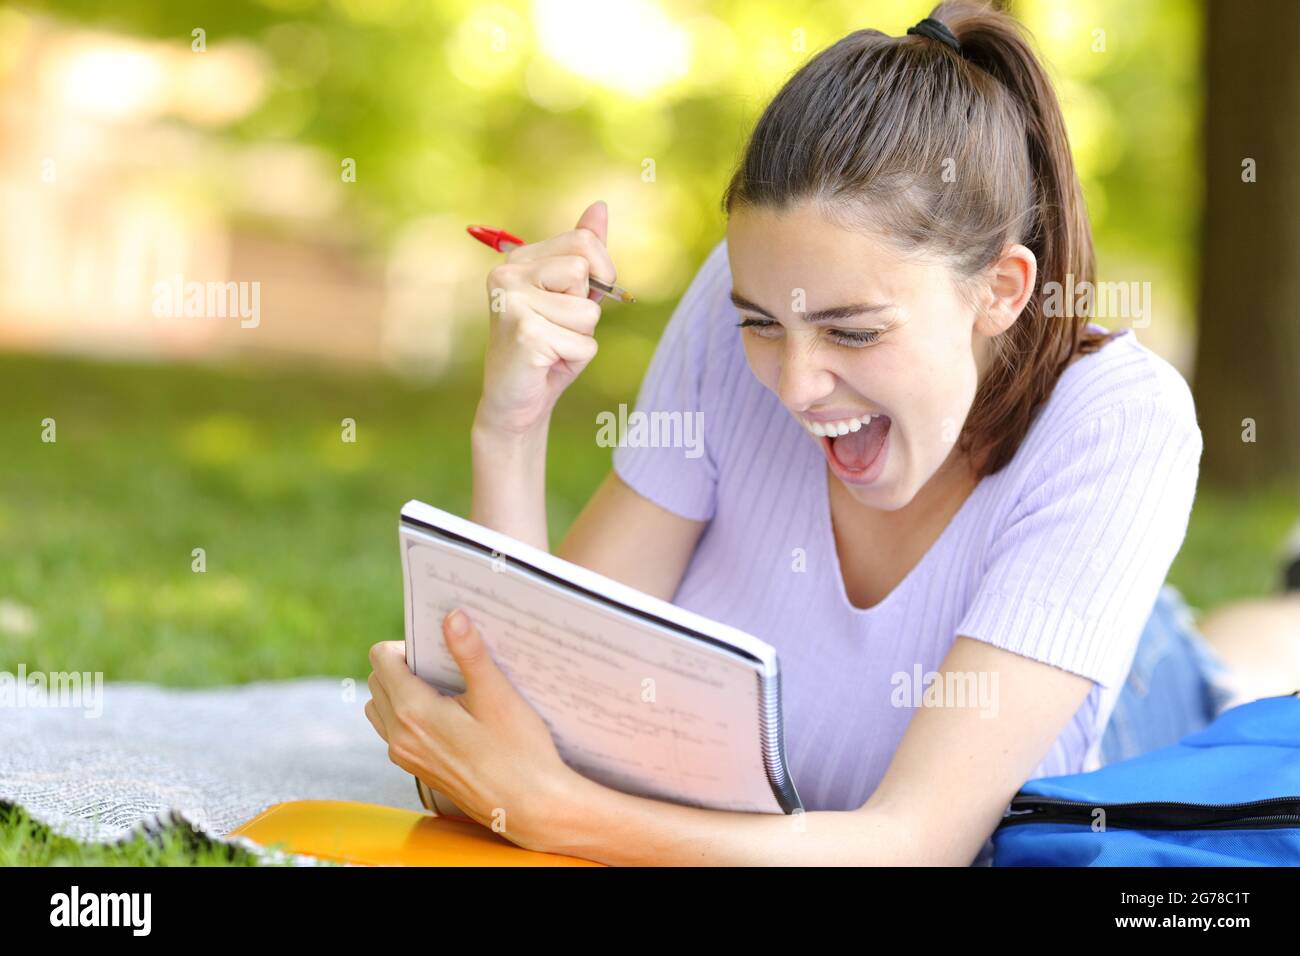 Excited student celebrating success reading notes in a campus Stock Photo